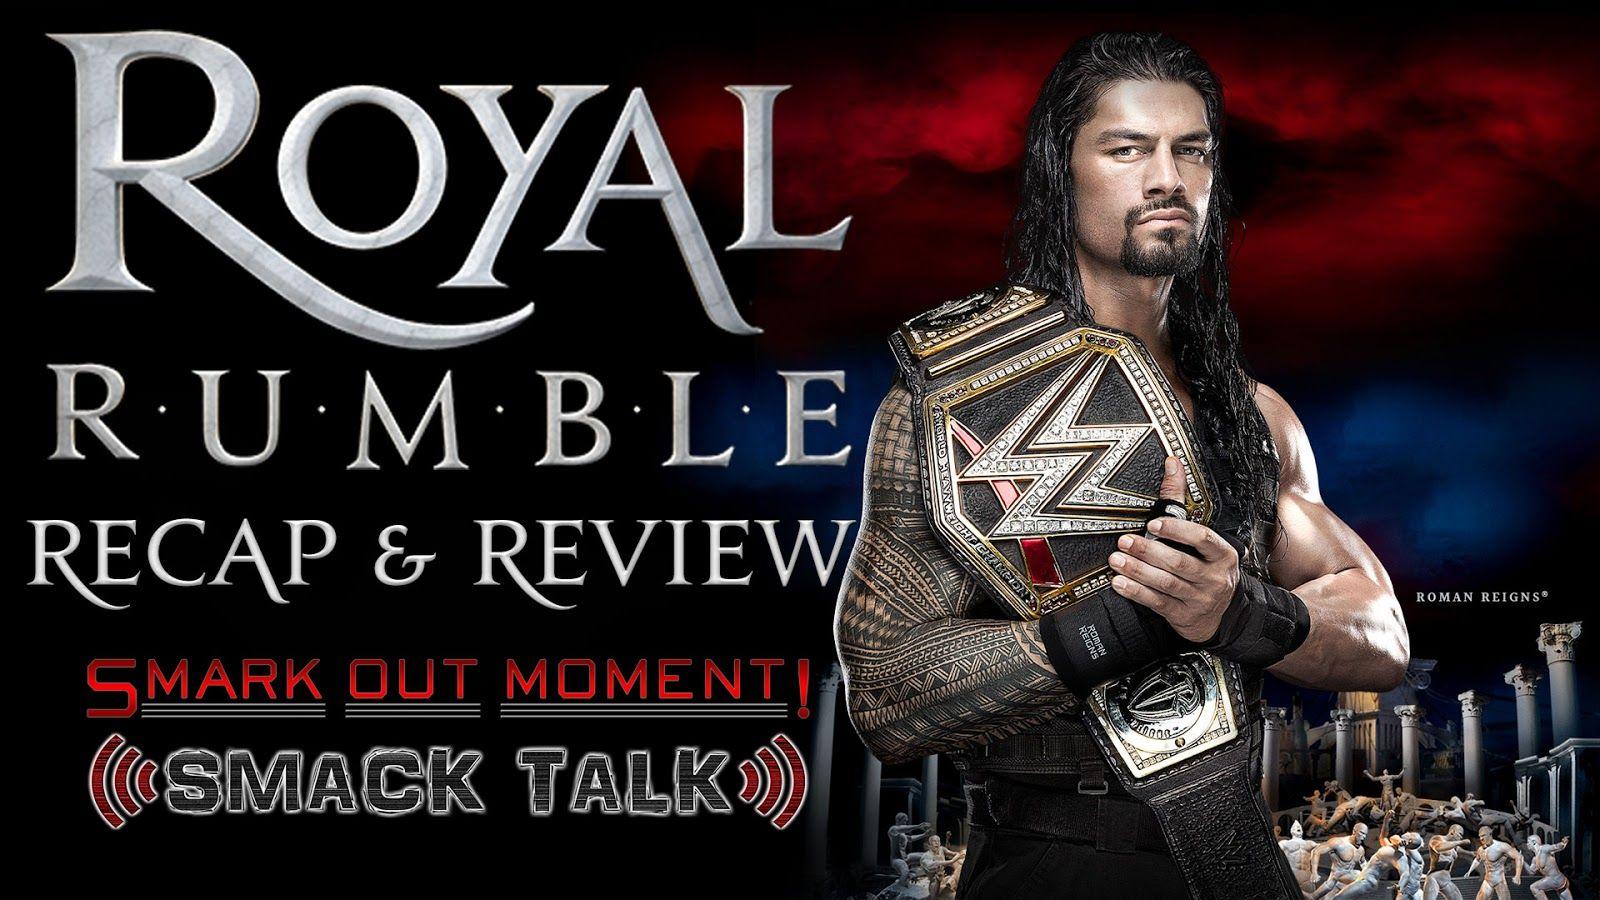 WWE Royal Rumble 2016 Post Show Recap & Review. Smark Out Moment